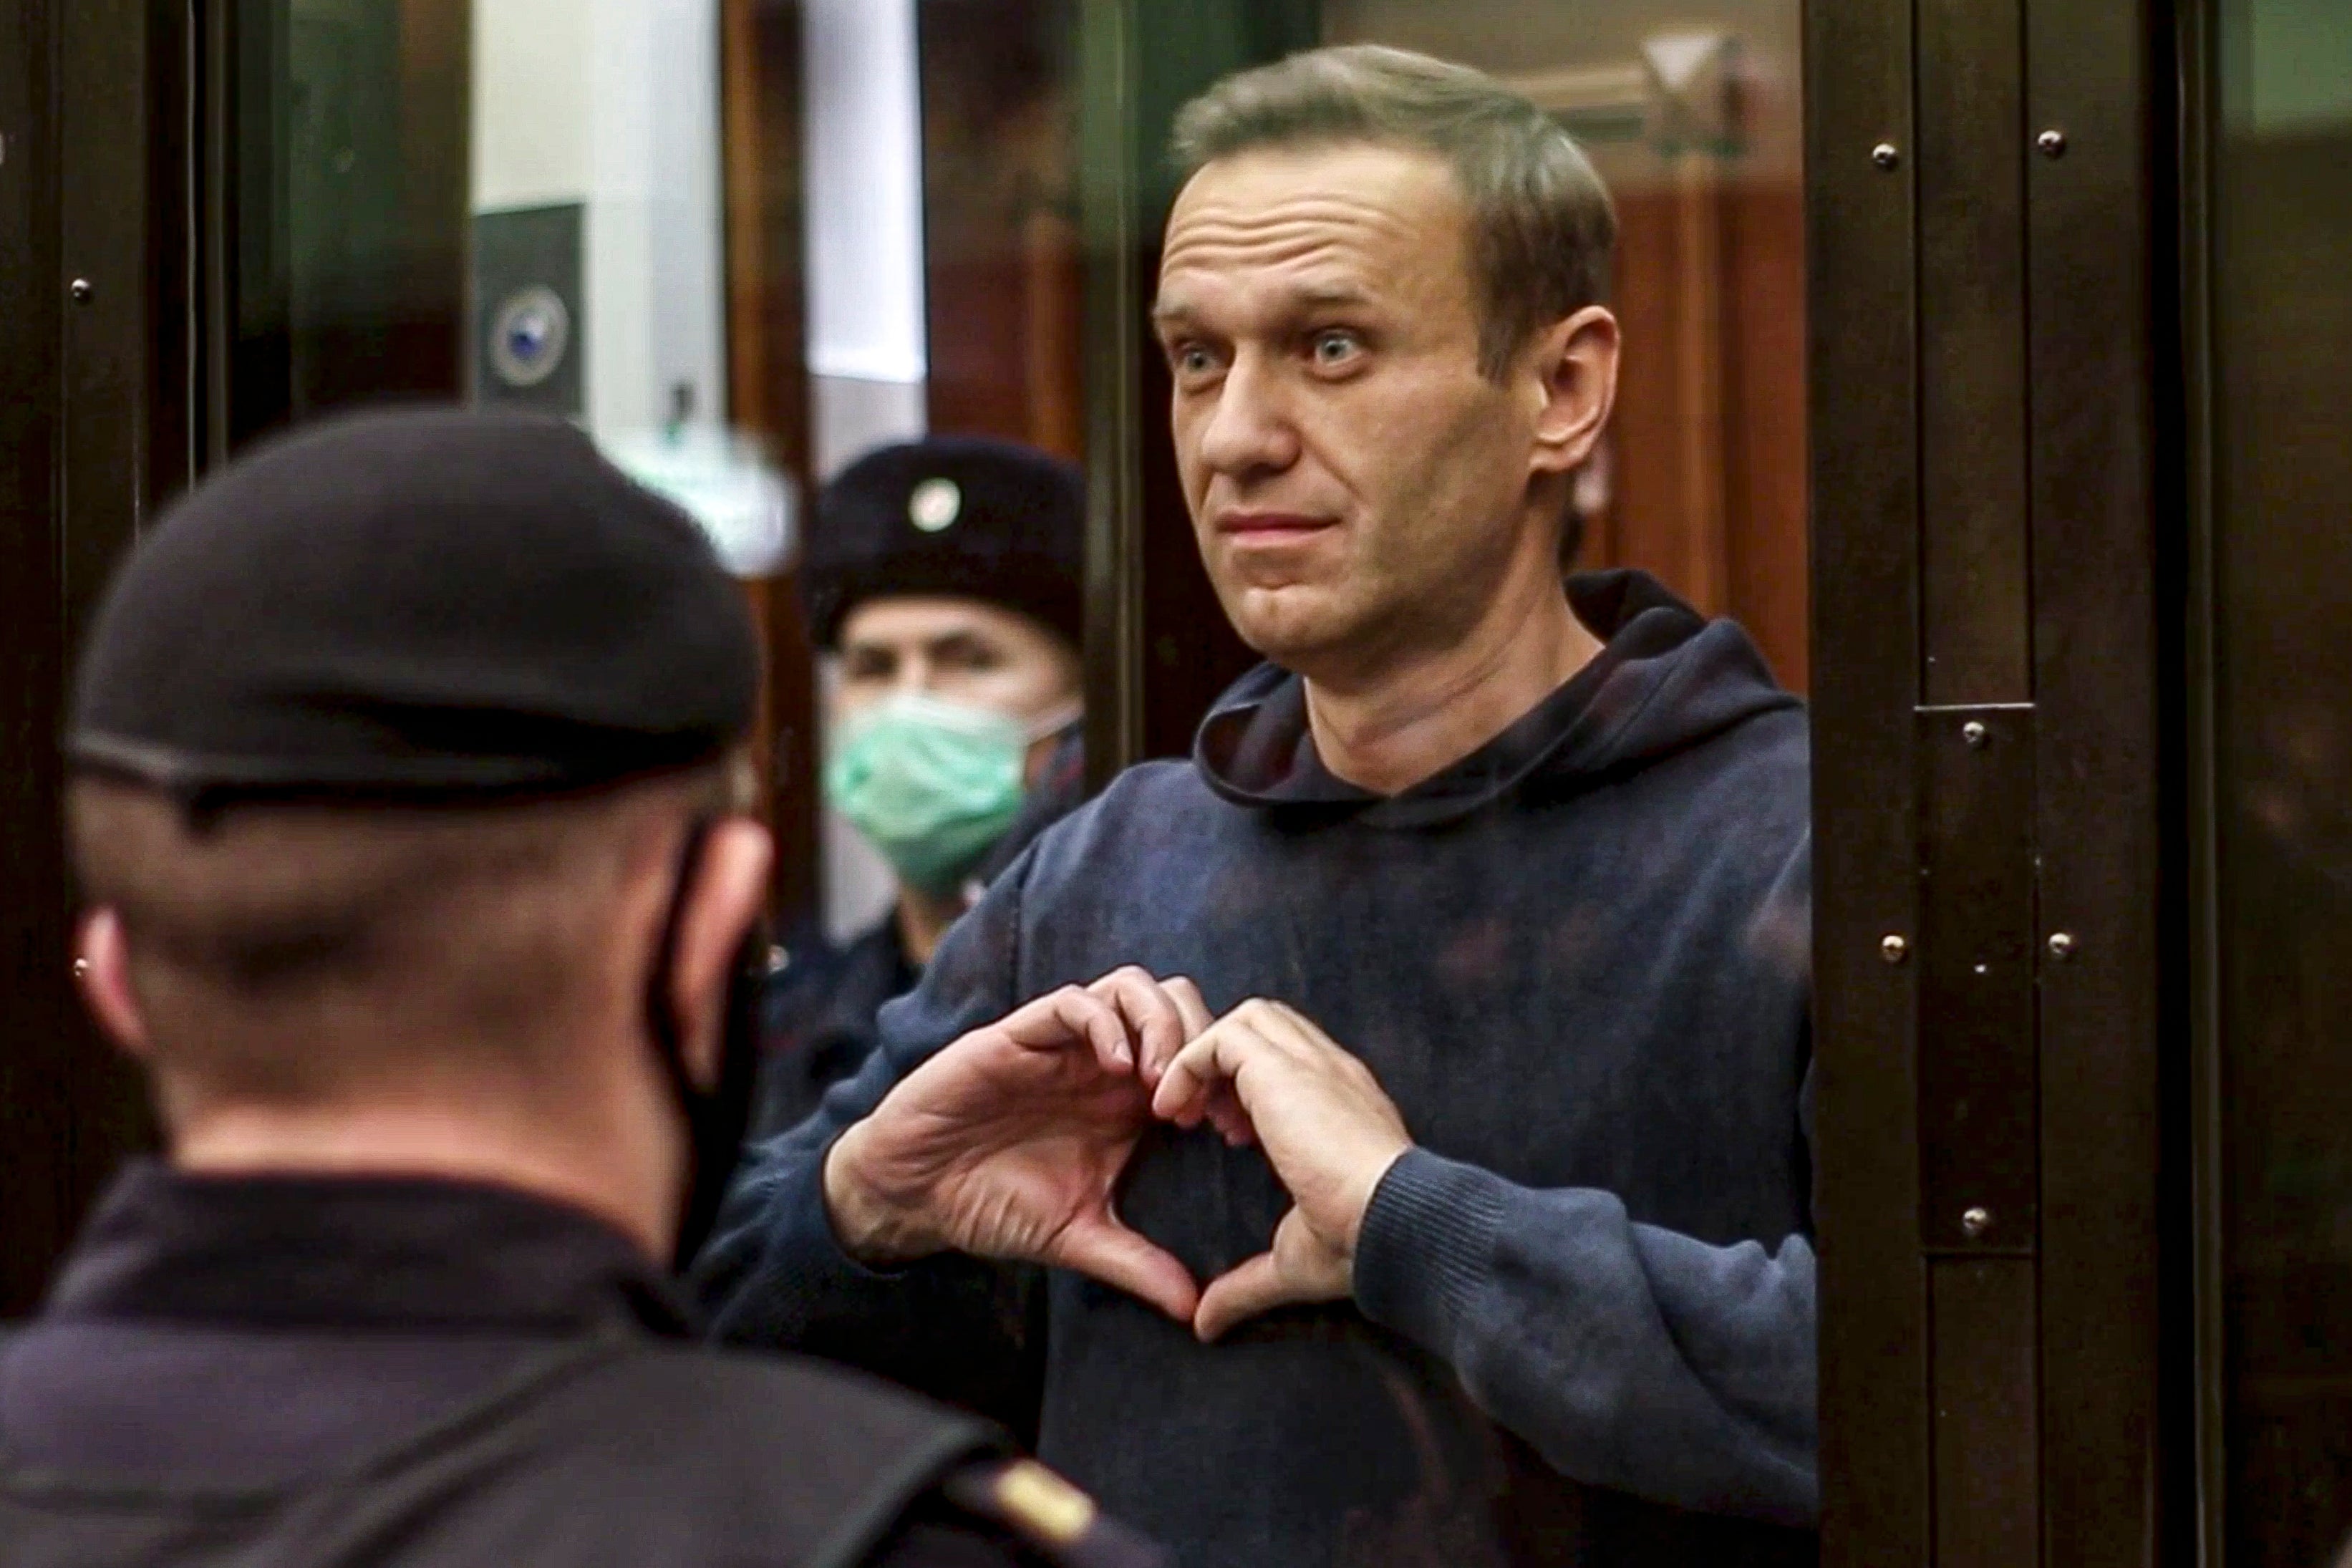 Alexei Navalny at Moscow court hearing in February 2021